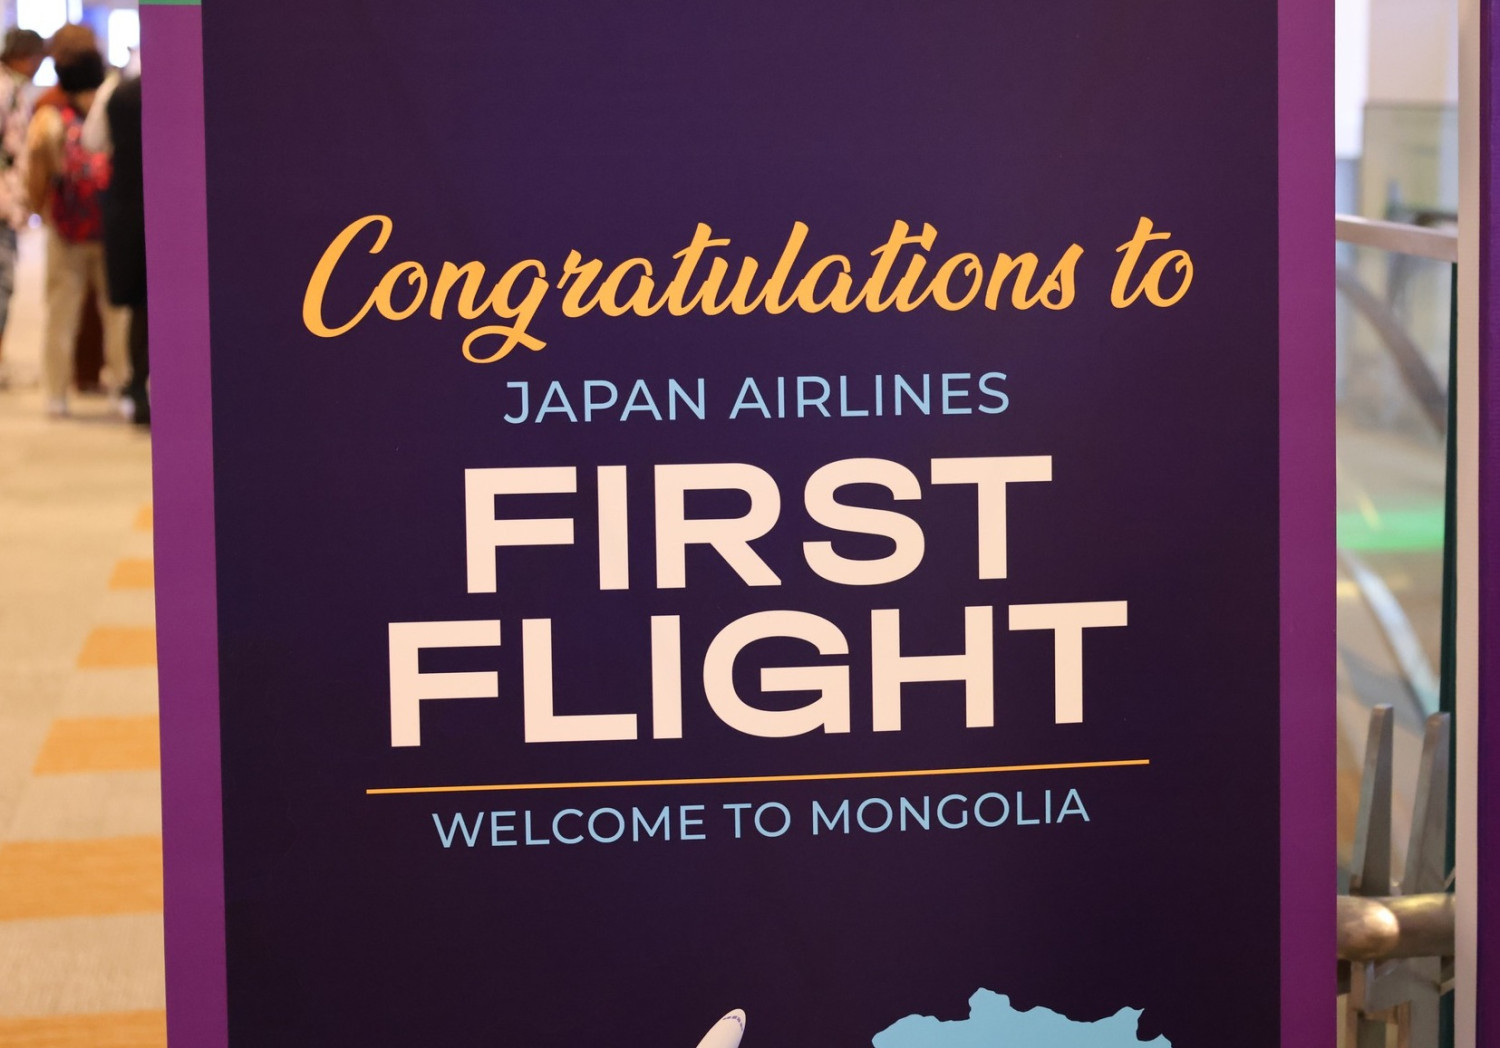 128 Japanese tourists arrived in Mongolia by Japan Airlines’ first flight